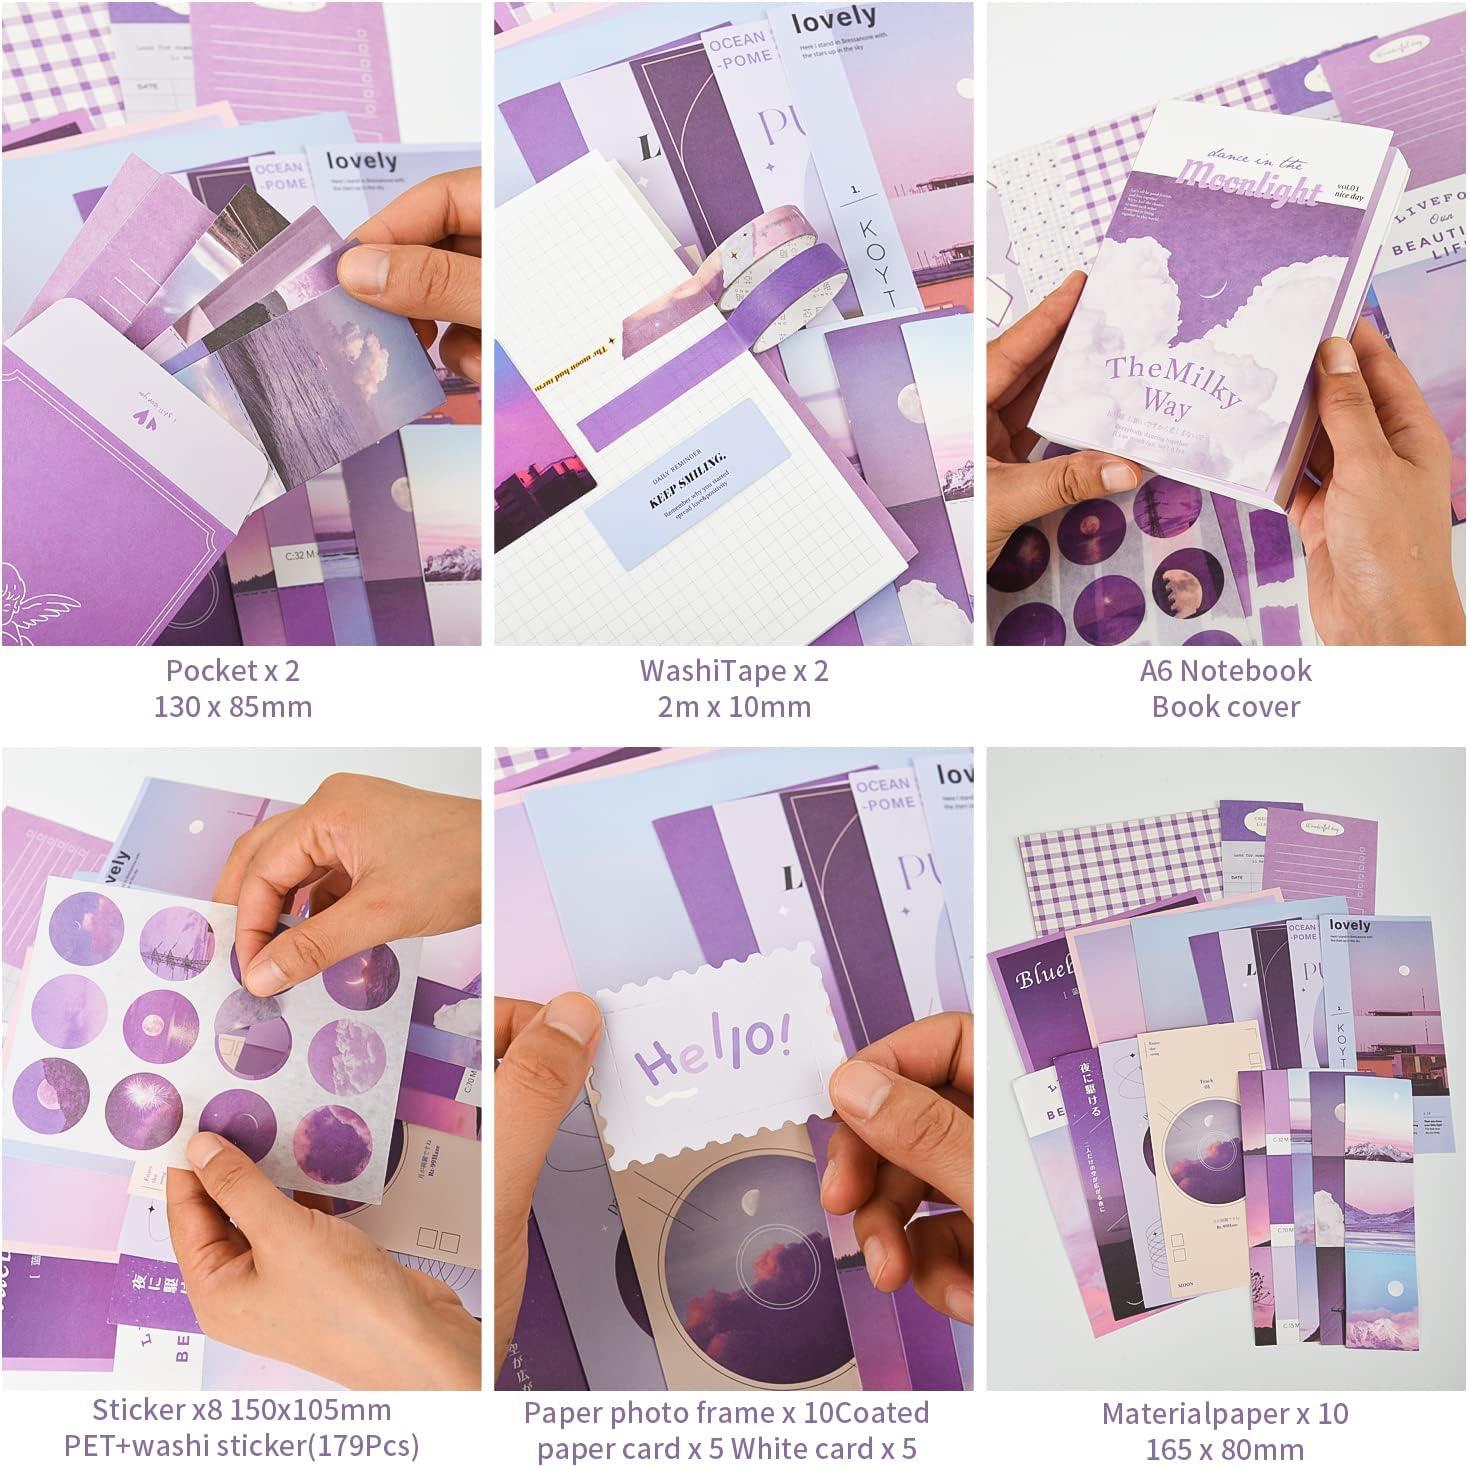 Unboxing “The Ultimate Scrapbook Supplies Kit” and Creating a Sample Page 